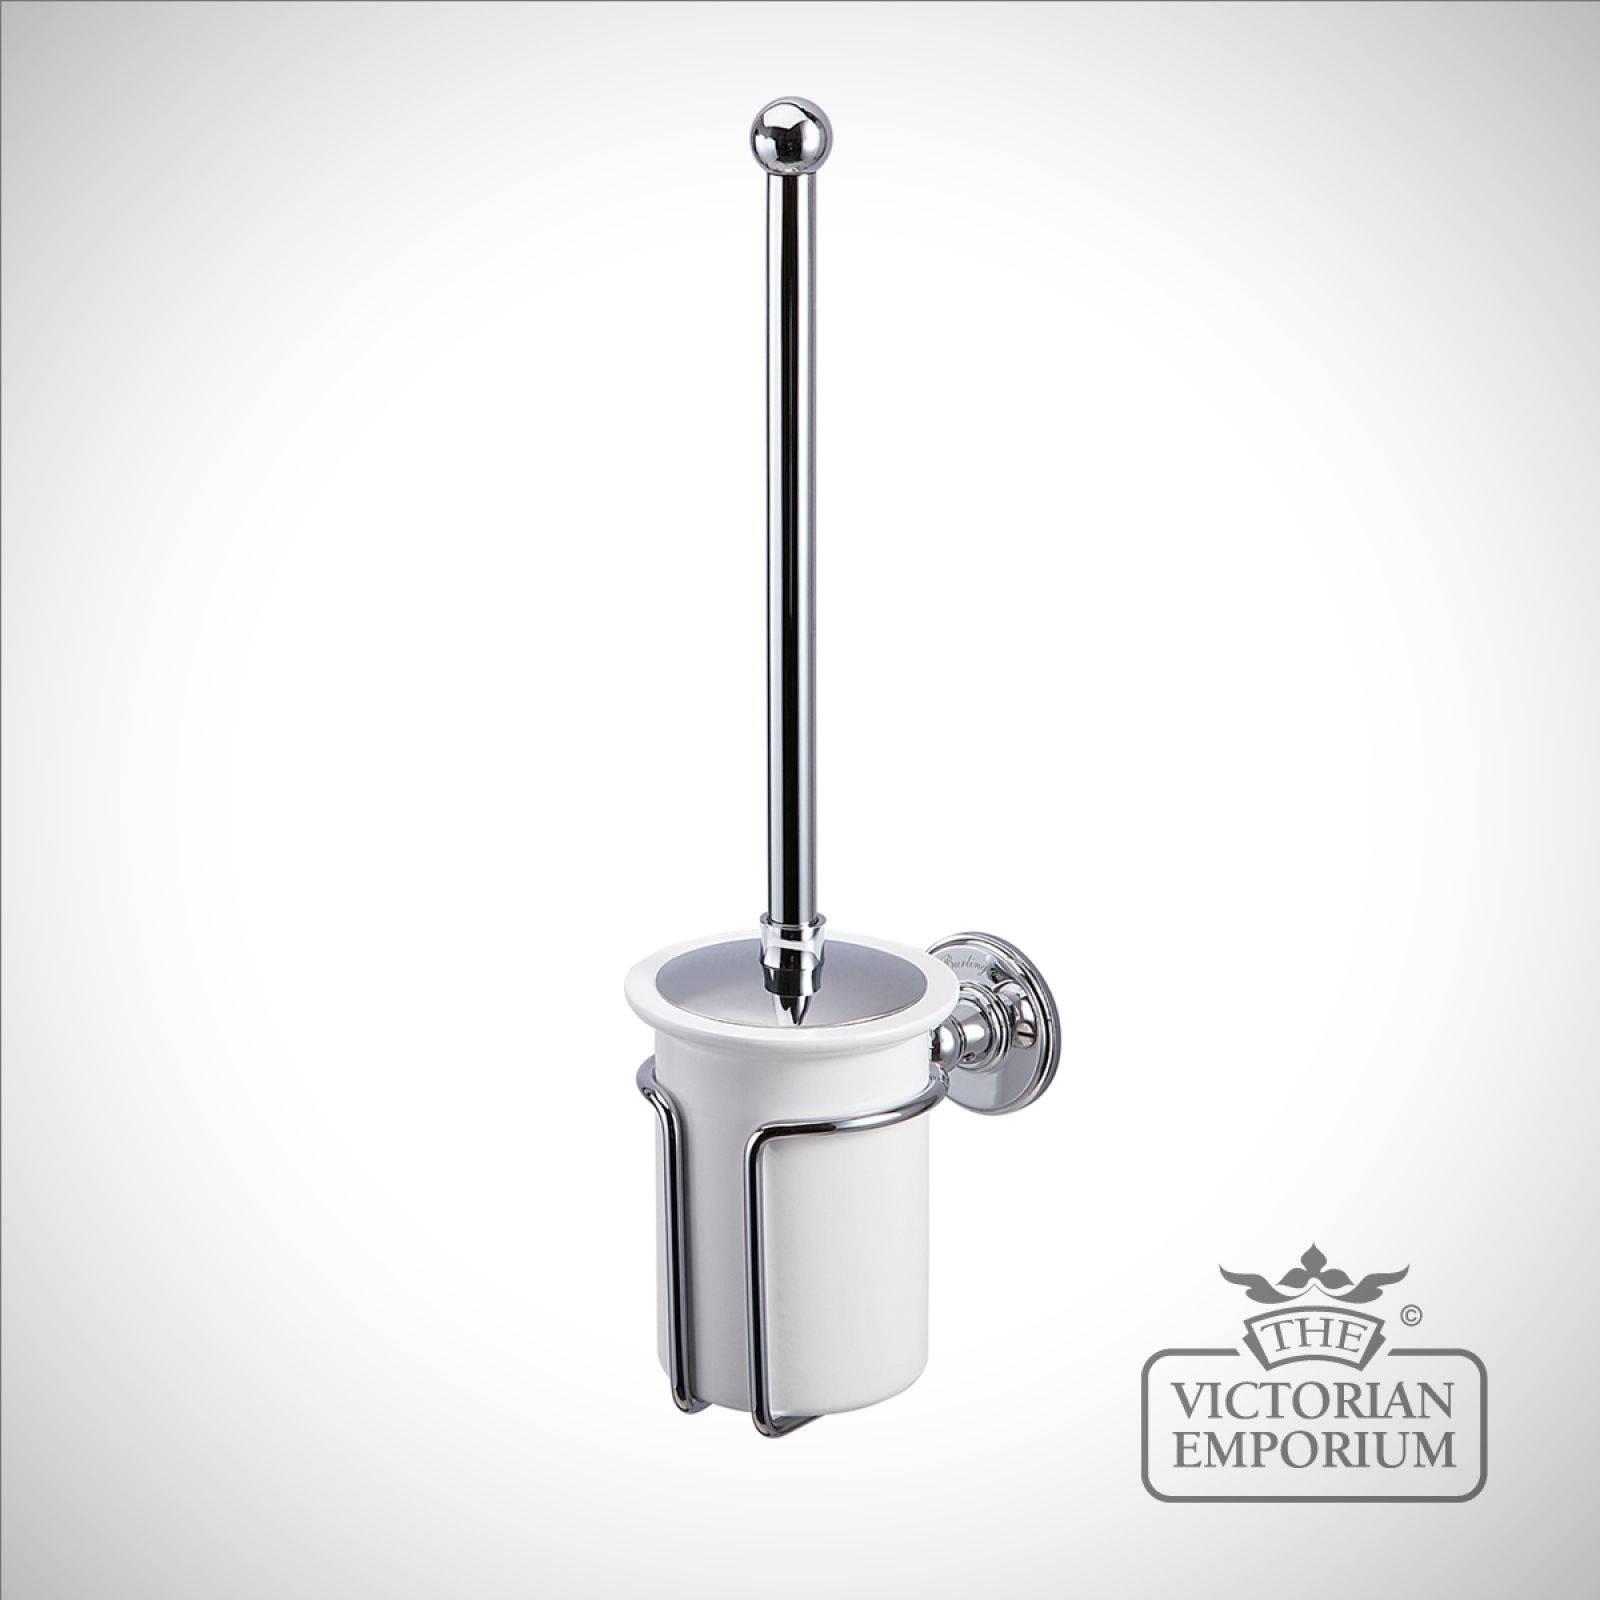 Victorian Style Toilet Brush And Holder, Victorian Bathroom Accessories